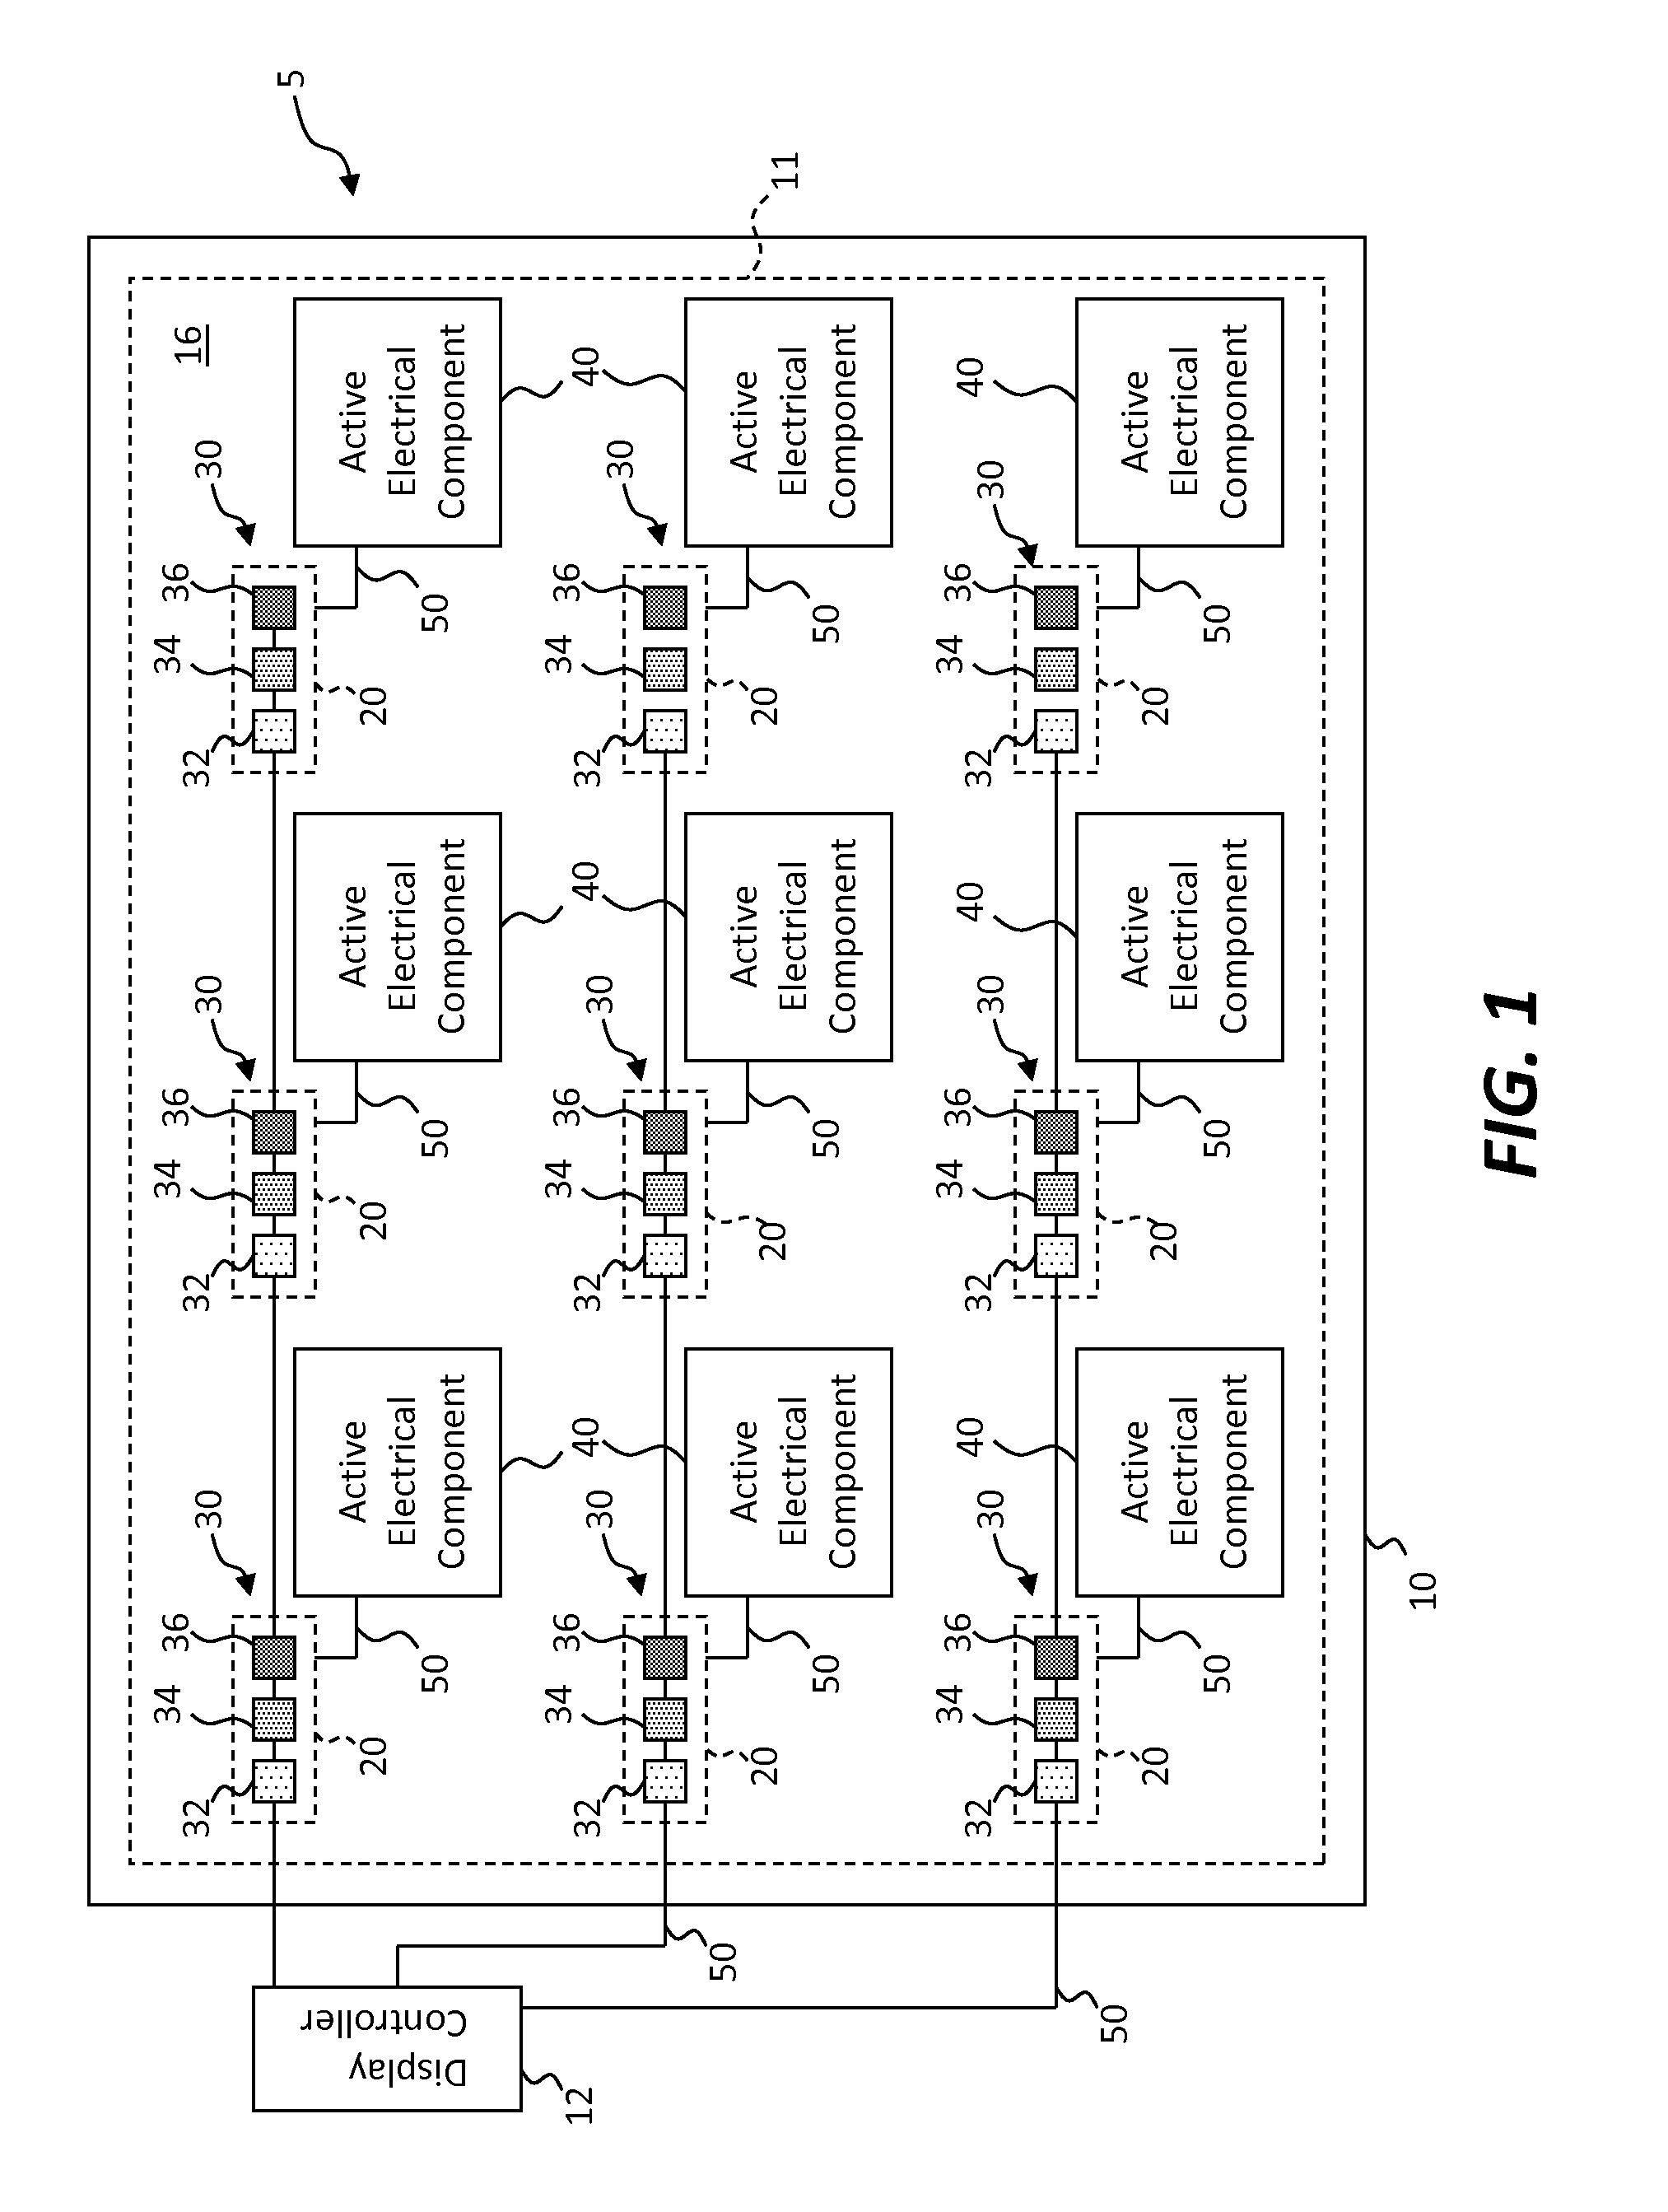 Small-aperture-ratio display with electrical component